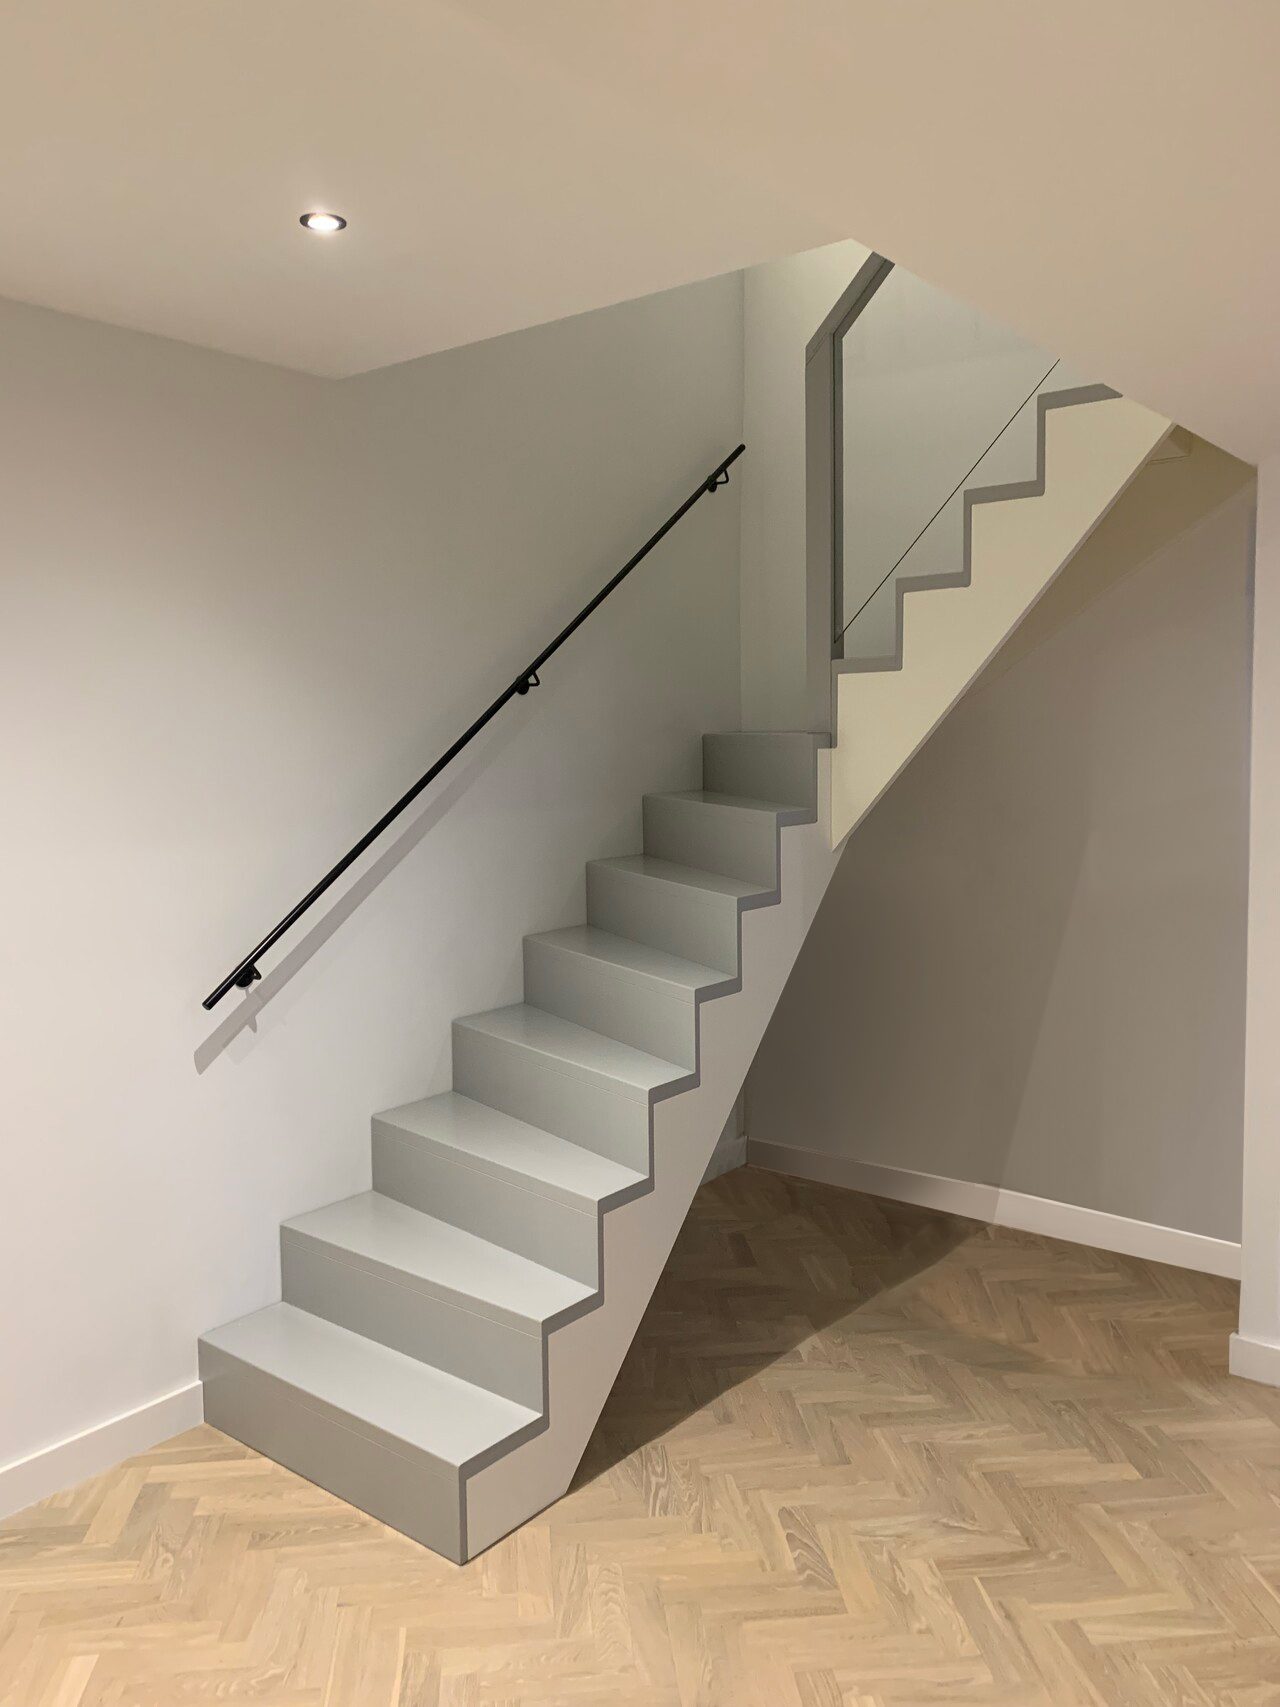 Design staircase with glass railings